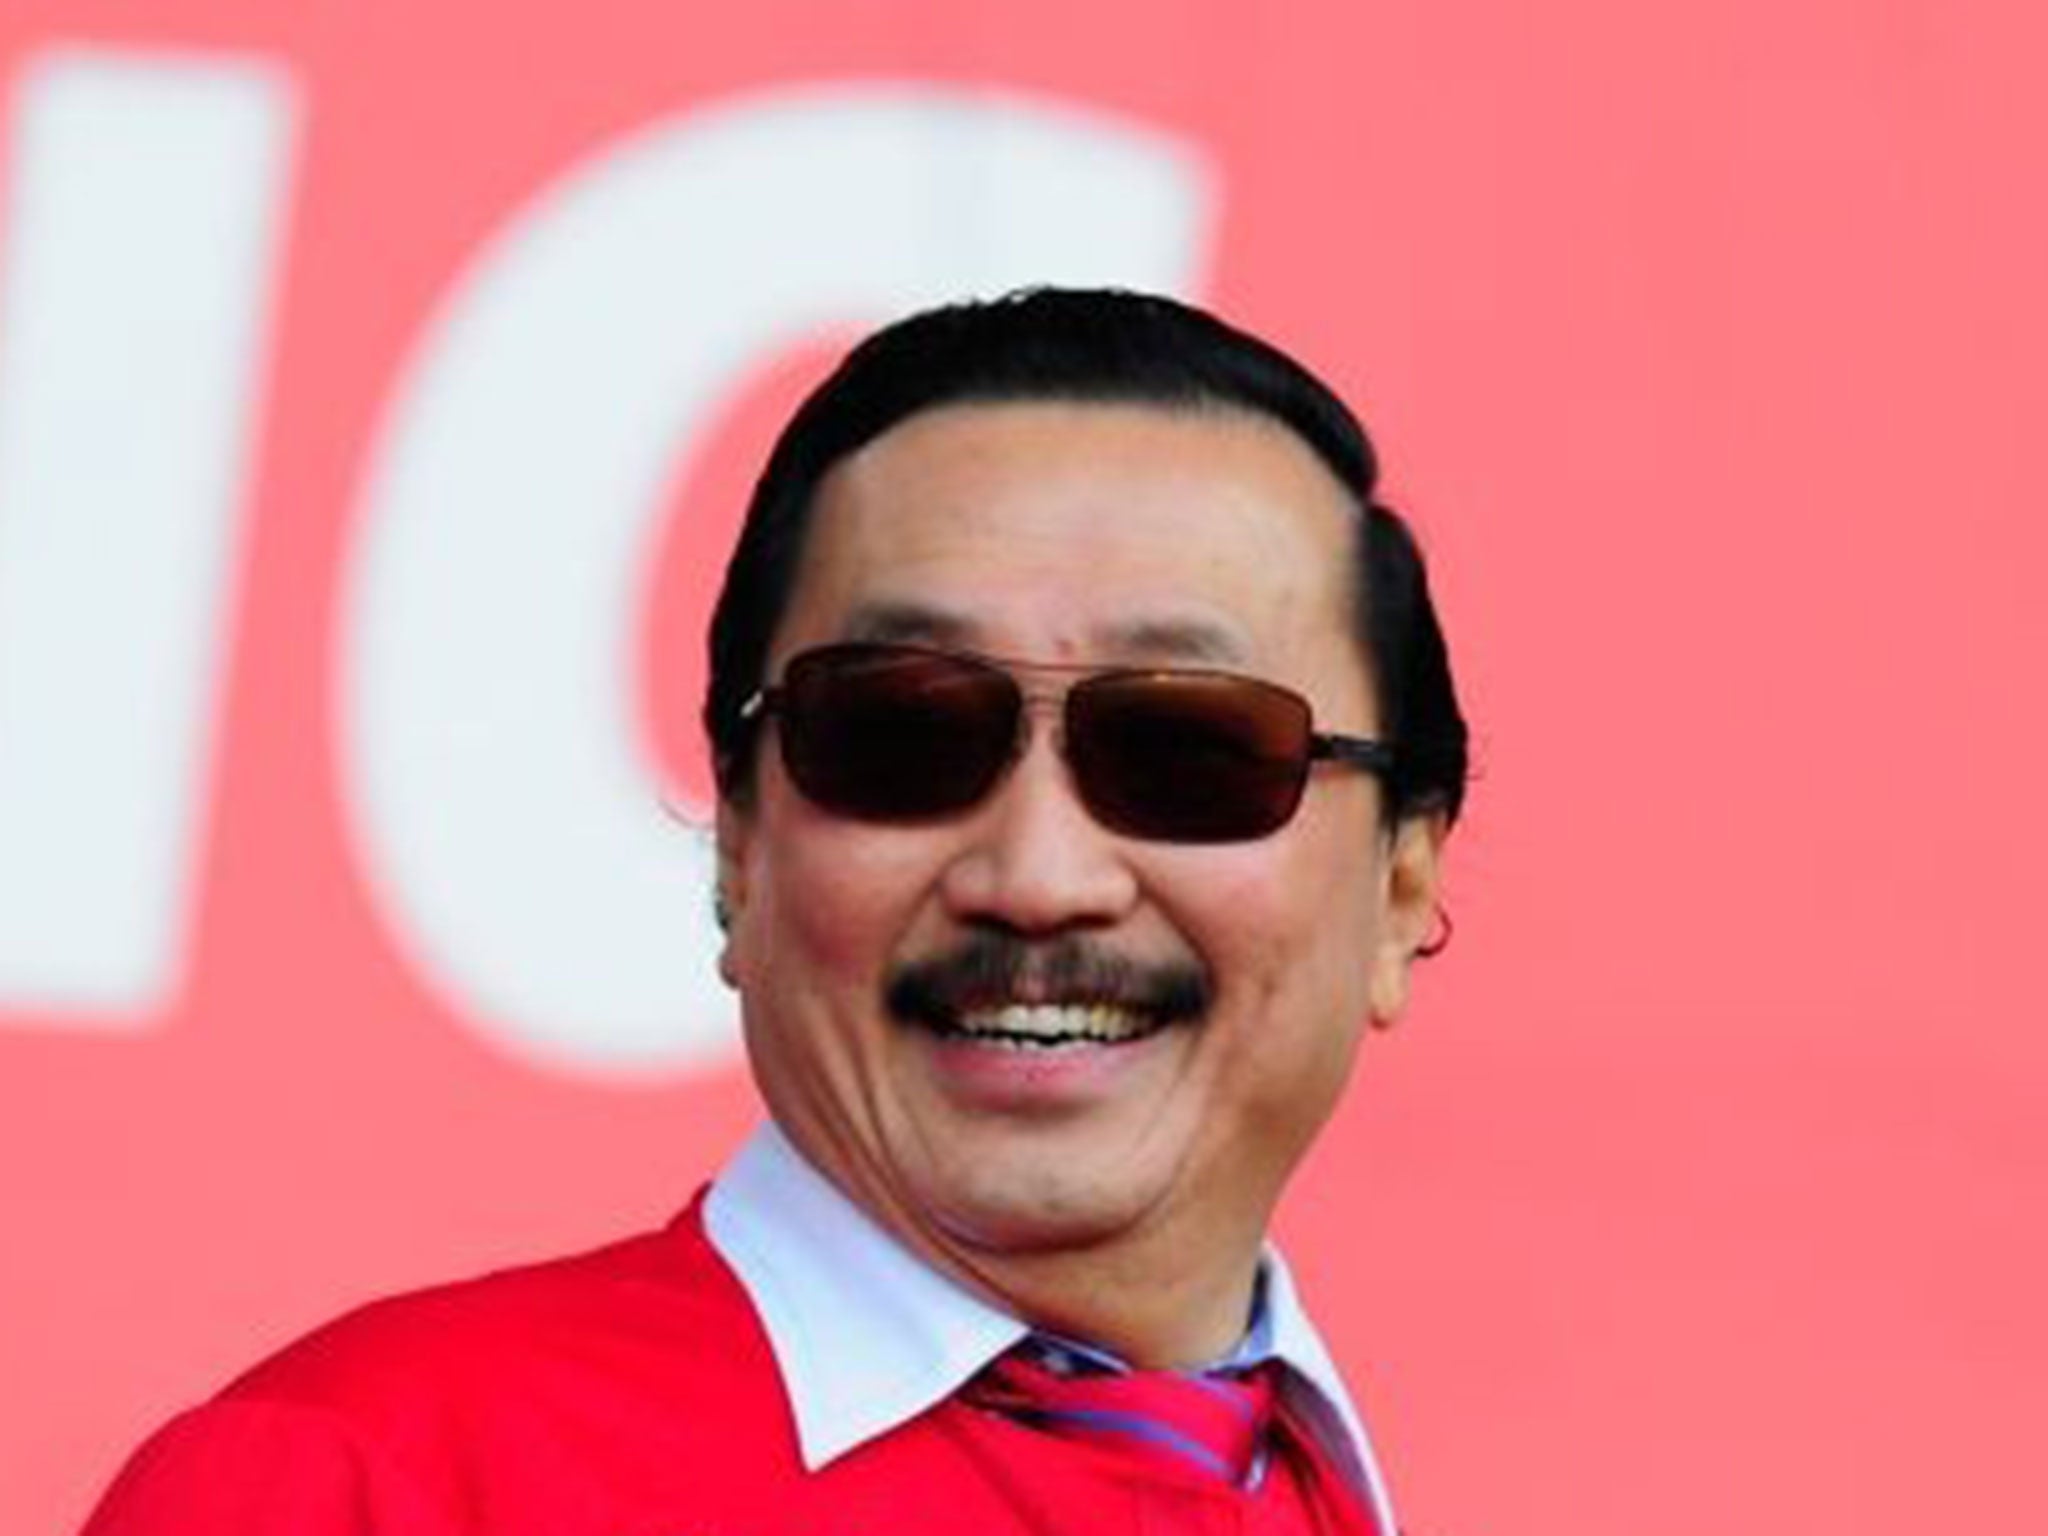 Cardiff City’s owner, Vincent Tan, antagonised supporters, but they knew little of the hidden goings-on at the club